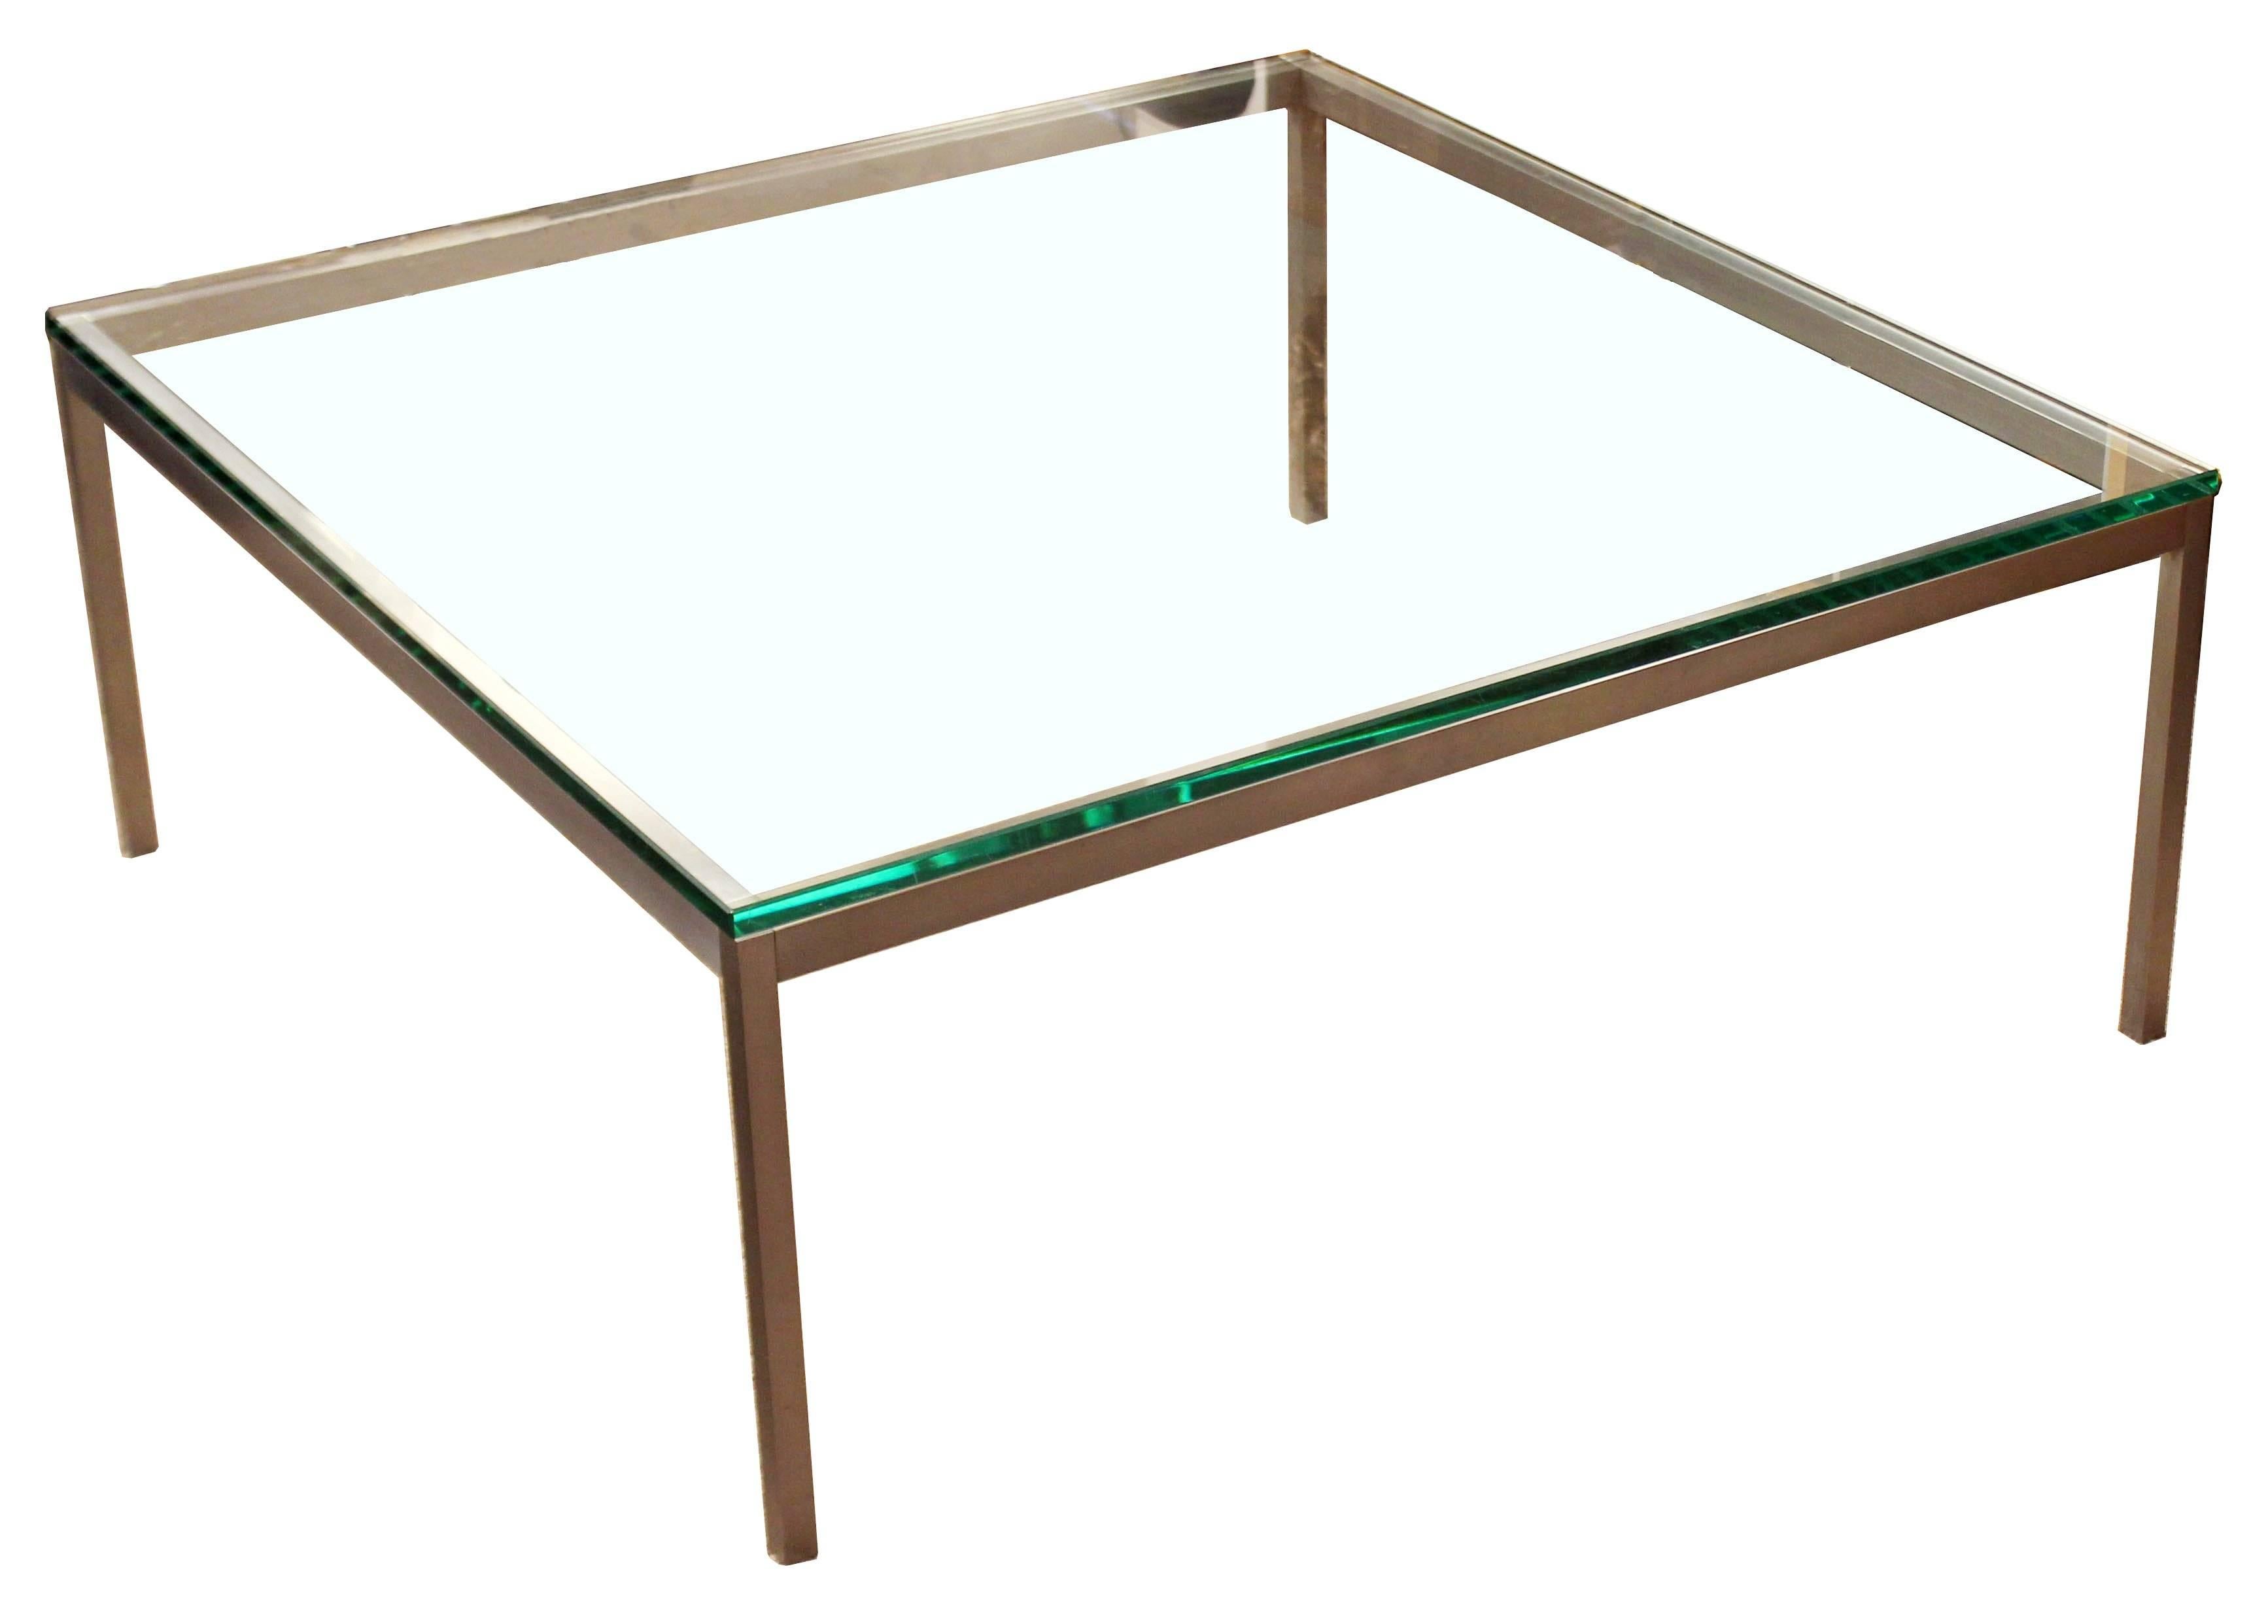 For your consideration is a gorgeous, square coffee table, with a metal base and thick glass top, by Knoll International, circa 1970s. Original tags and glass. In very good condition. The dimensions are 42